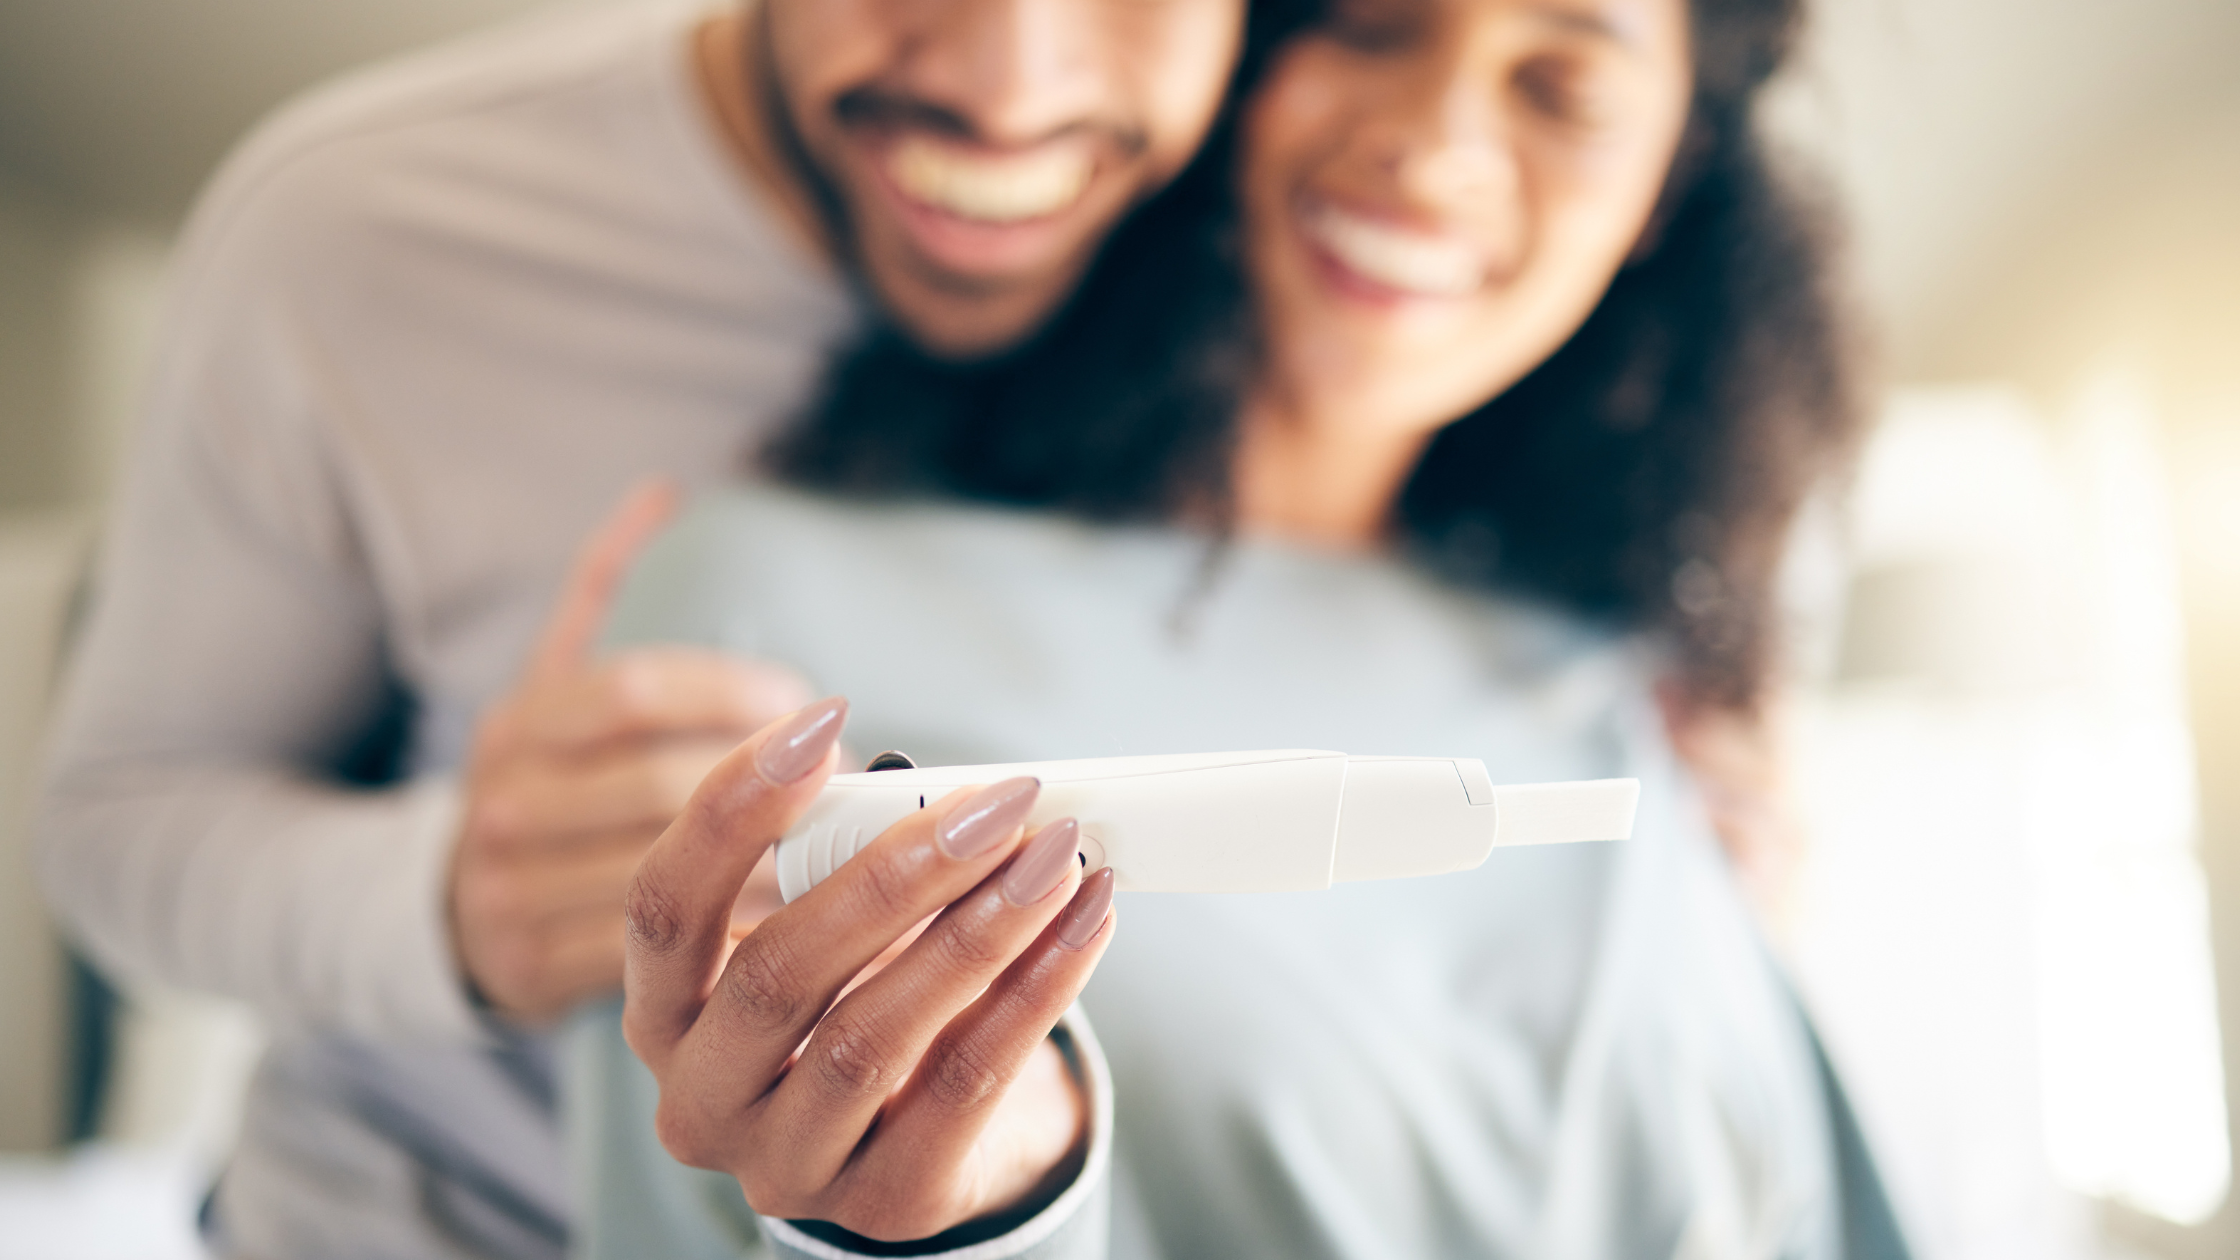 Couple looking at a pregnancy test